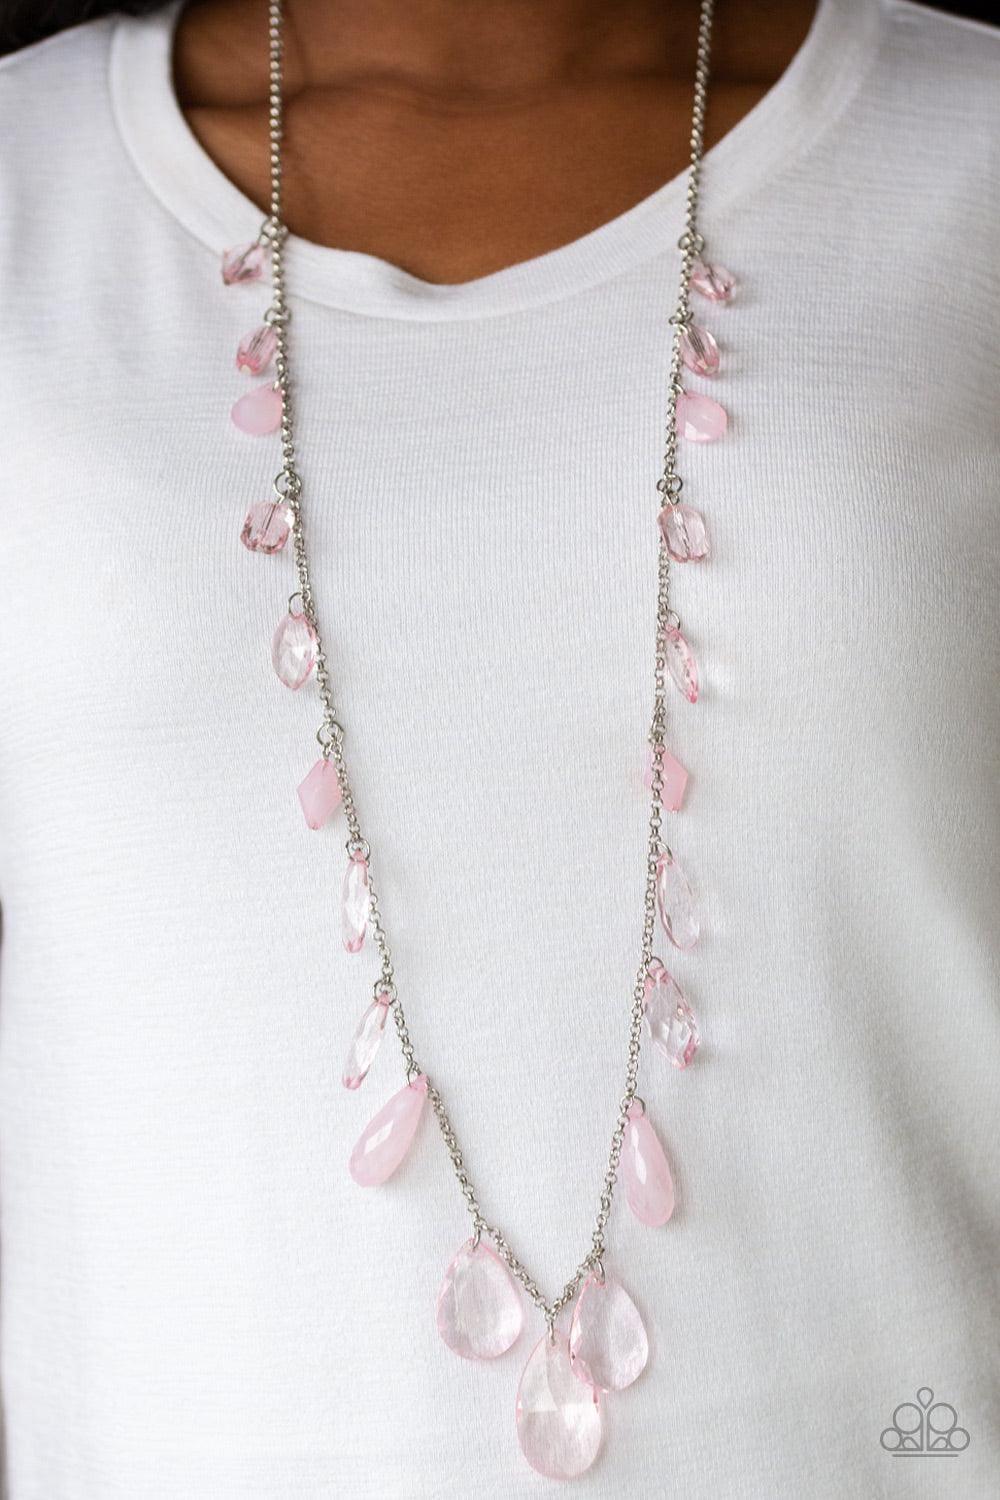 Paparazzi Accessories - Glow And Steady Wins The Race - Pink Necklace - Bling by JessieK